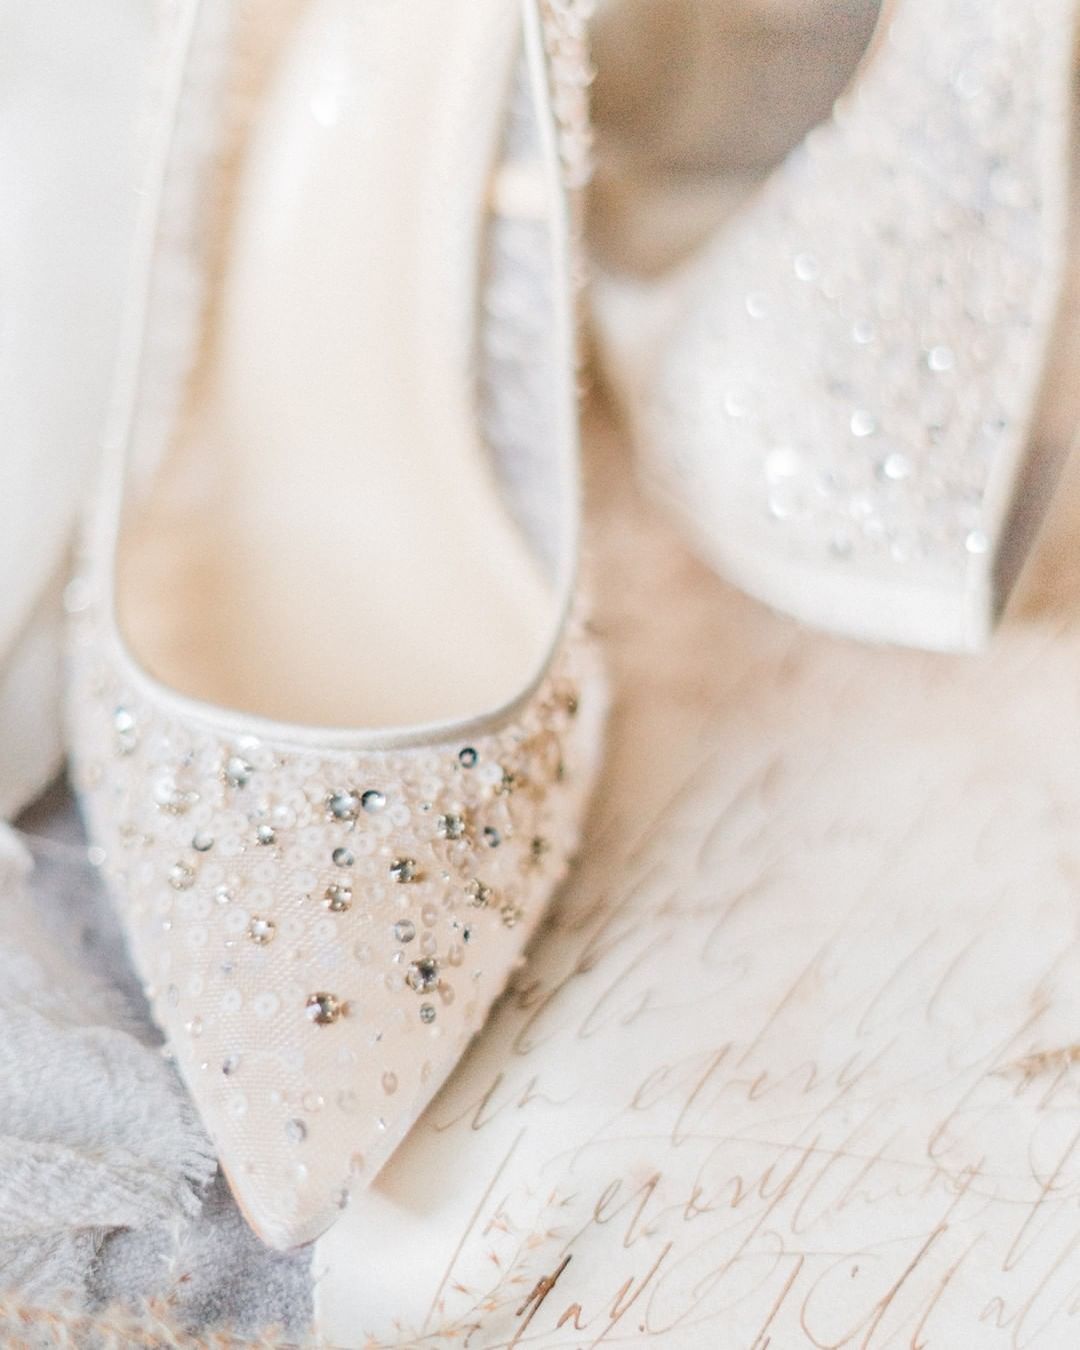 lace wedding shoes crystals